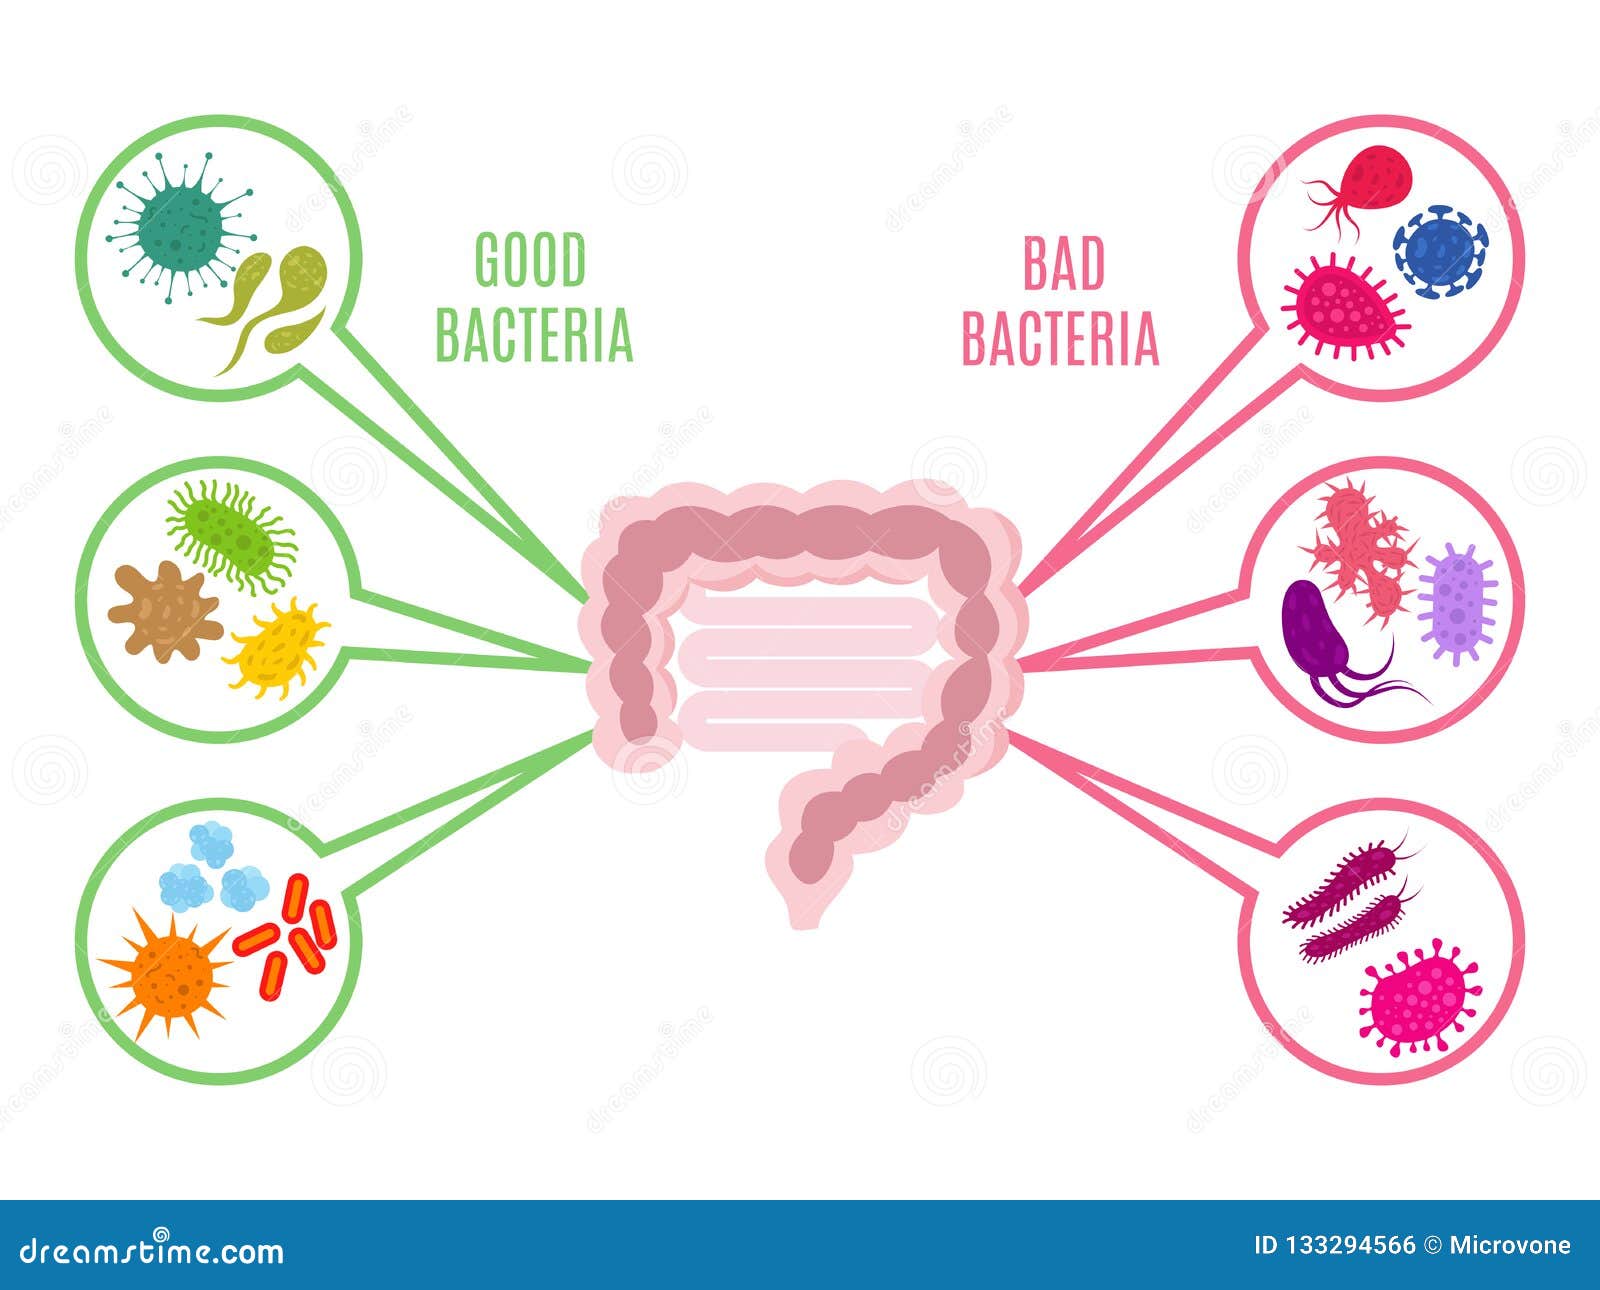 poster of intestinal flora gut health  concept with bacteria and probiotics icons  on white background